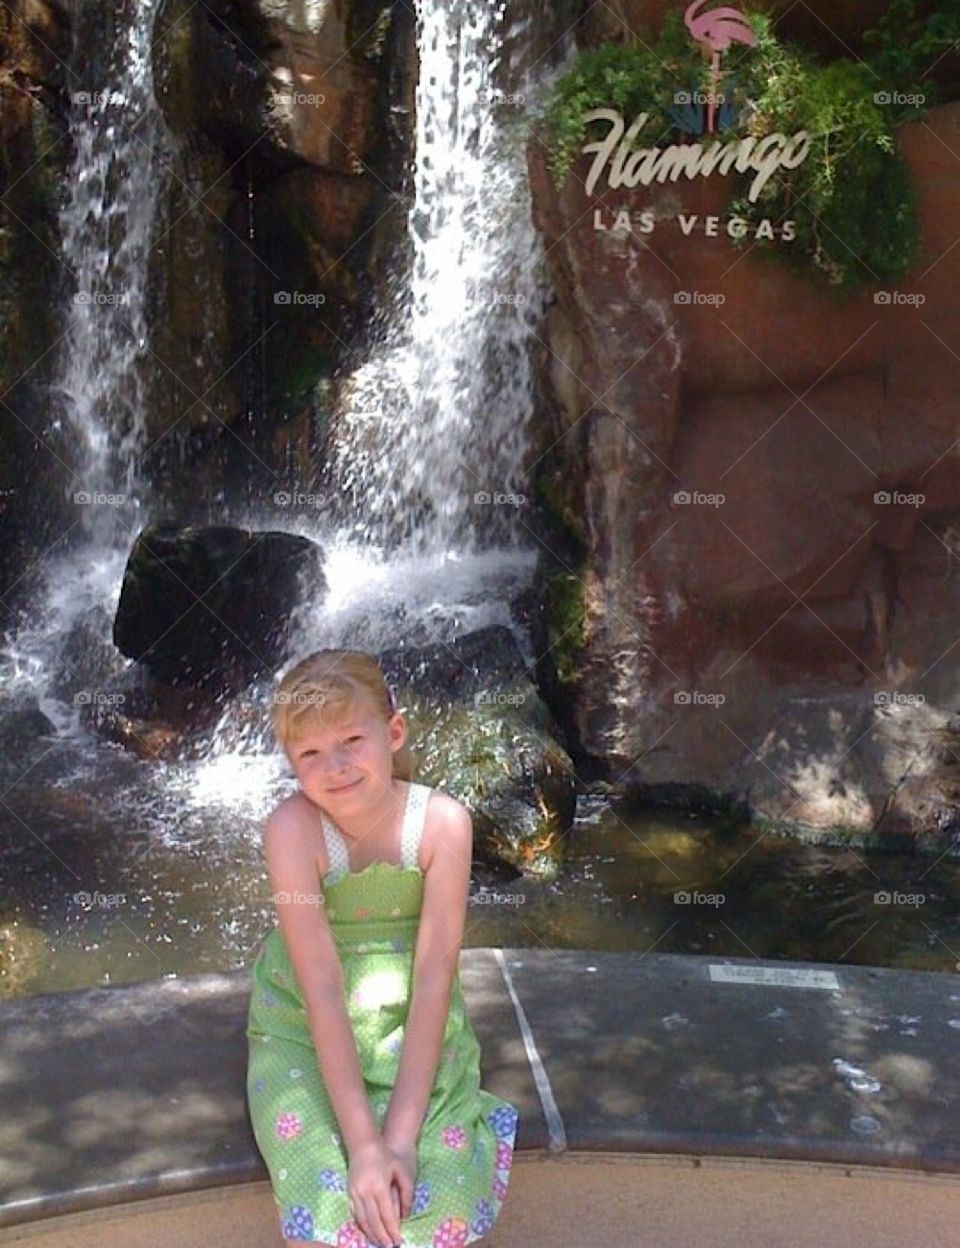 Beautiful photo at the Flamingo casino in Las Vegas in the back courtyard.